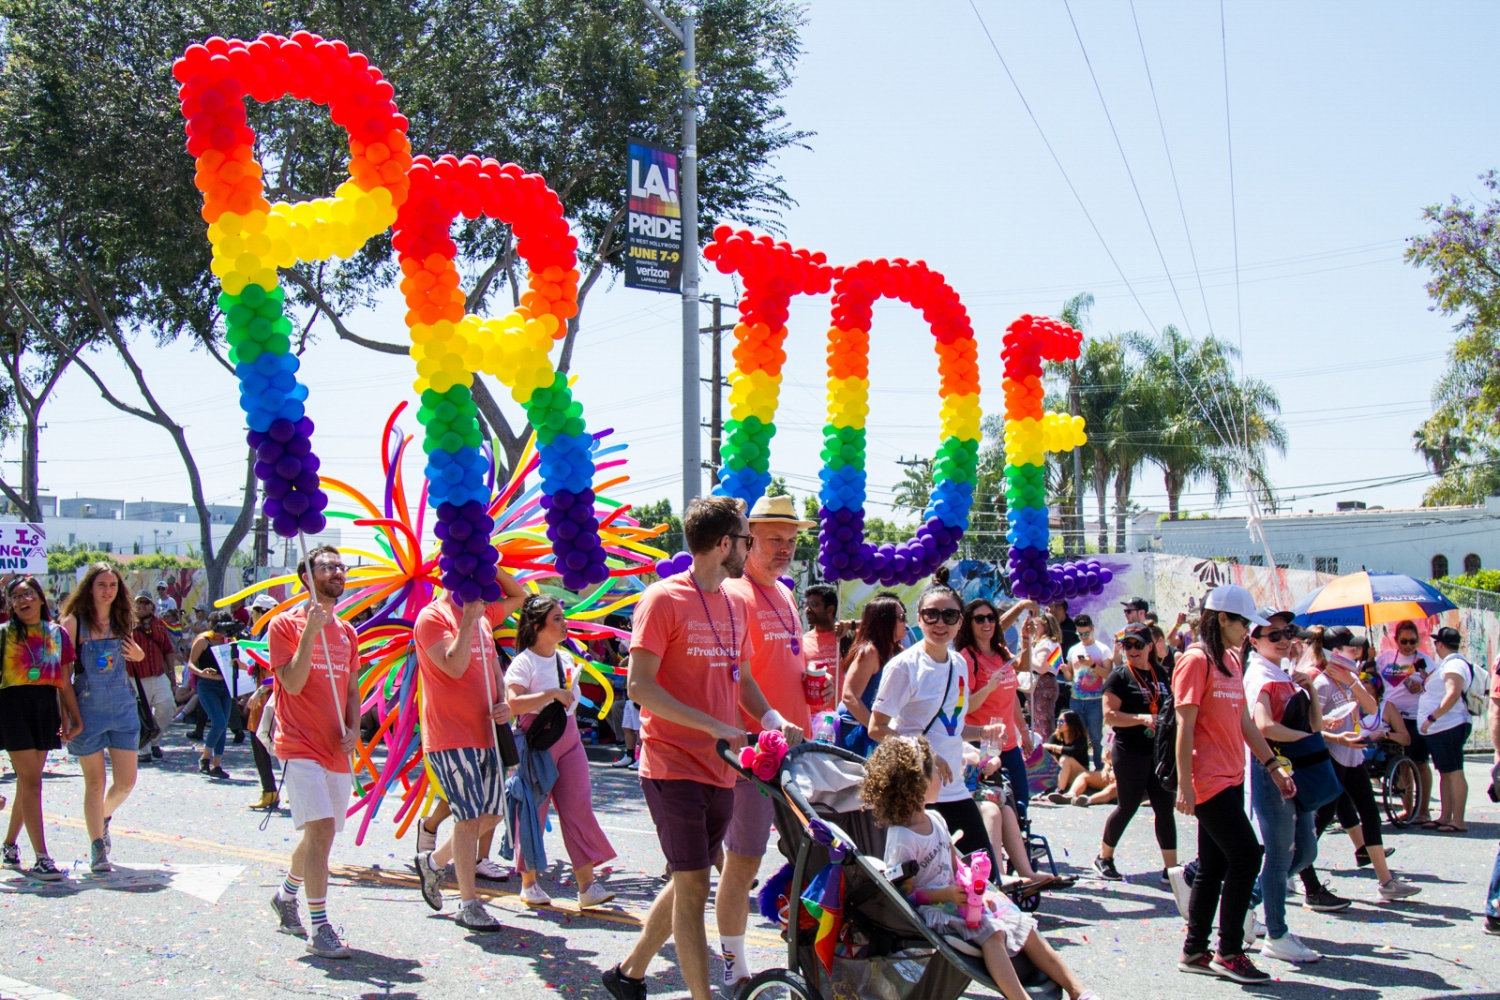 LA Pride hosting events online and inperson to uplift, celebrate